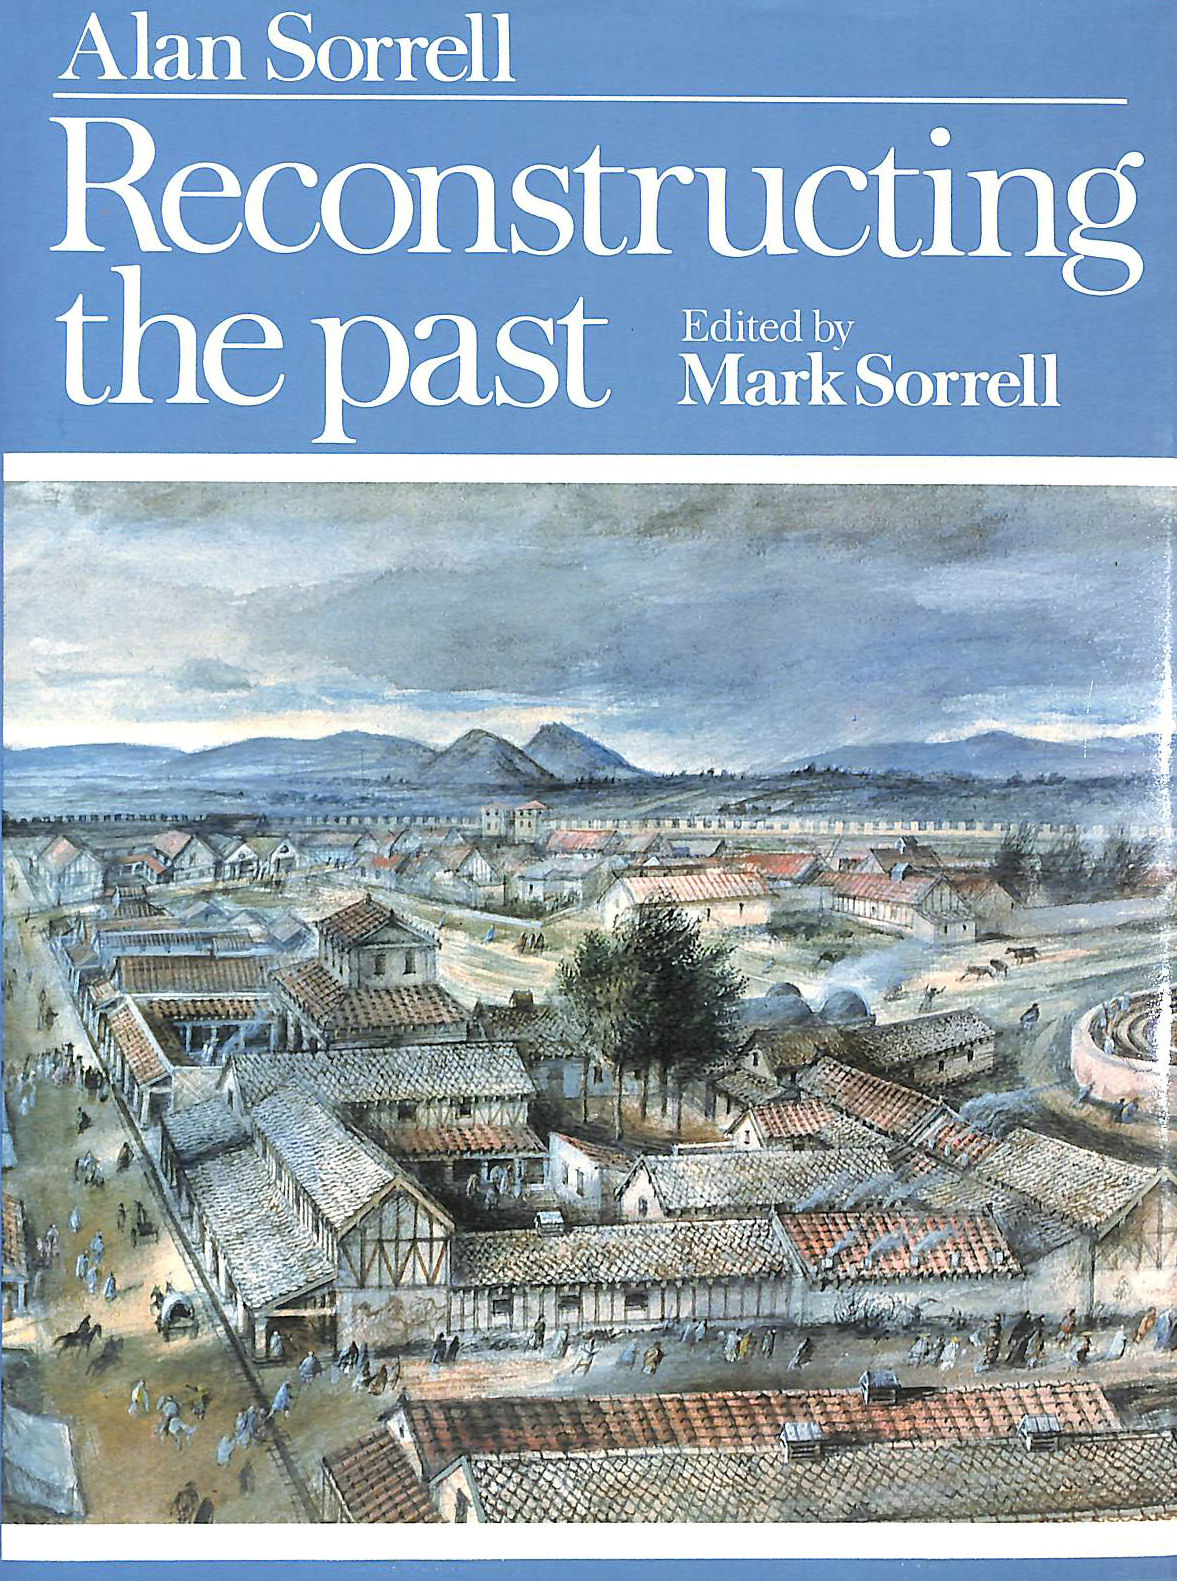 SORRELL ALAN - Reconstructing the past. Edited by Mark Sorrell